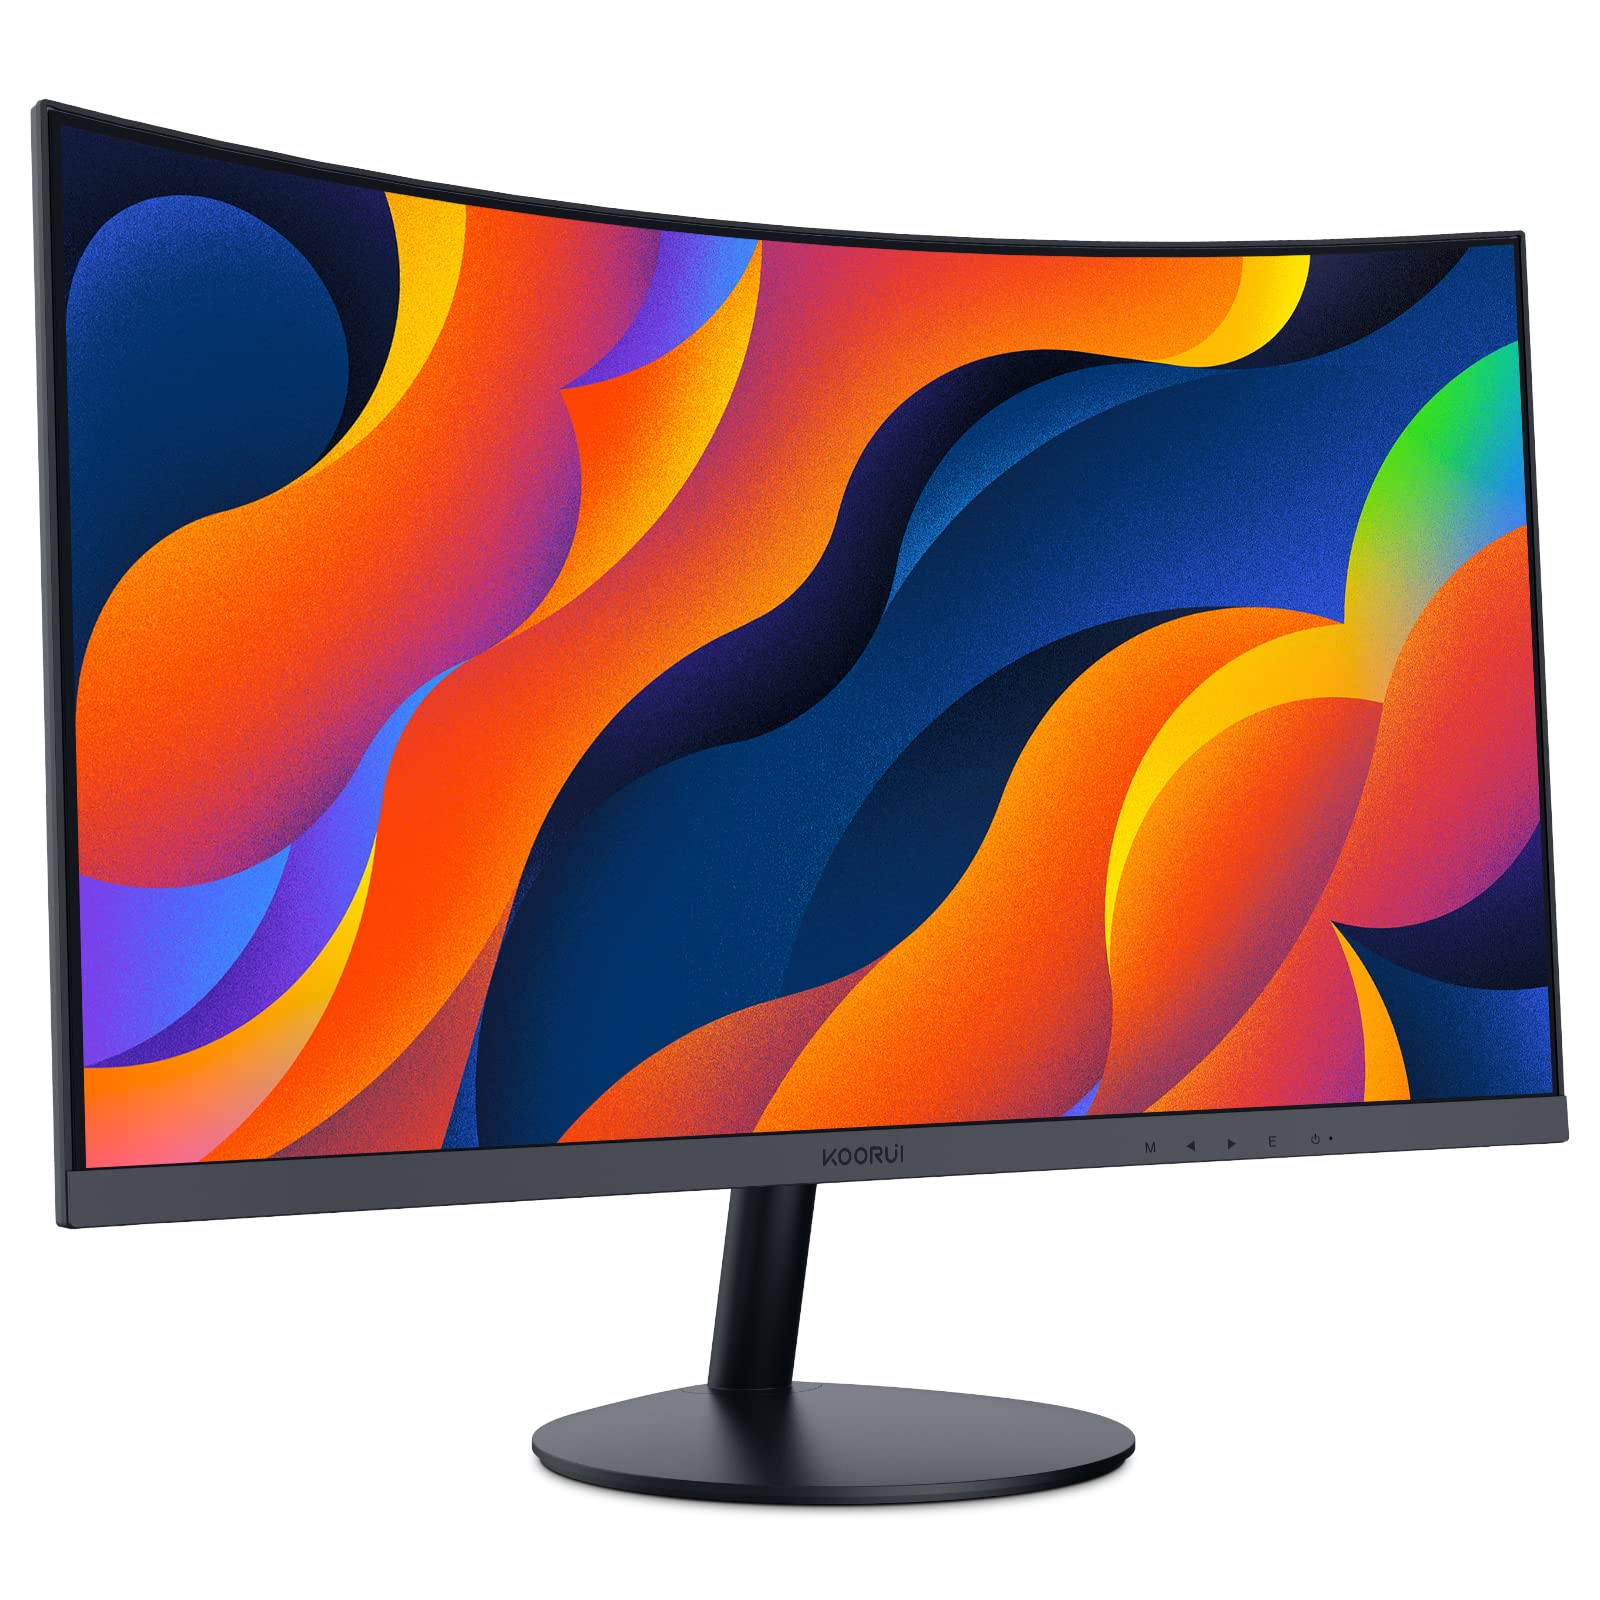 what-type-of-display-is-a-typical-computer-monitor